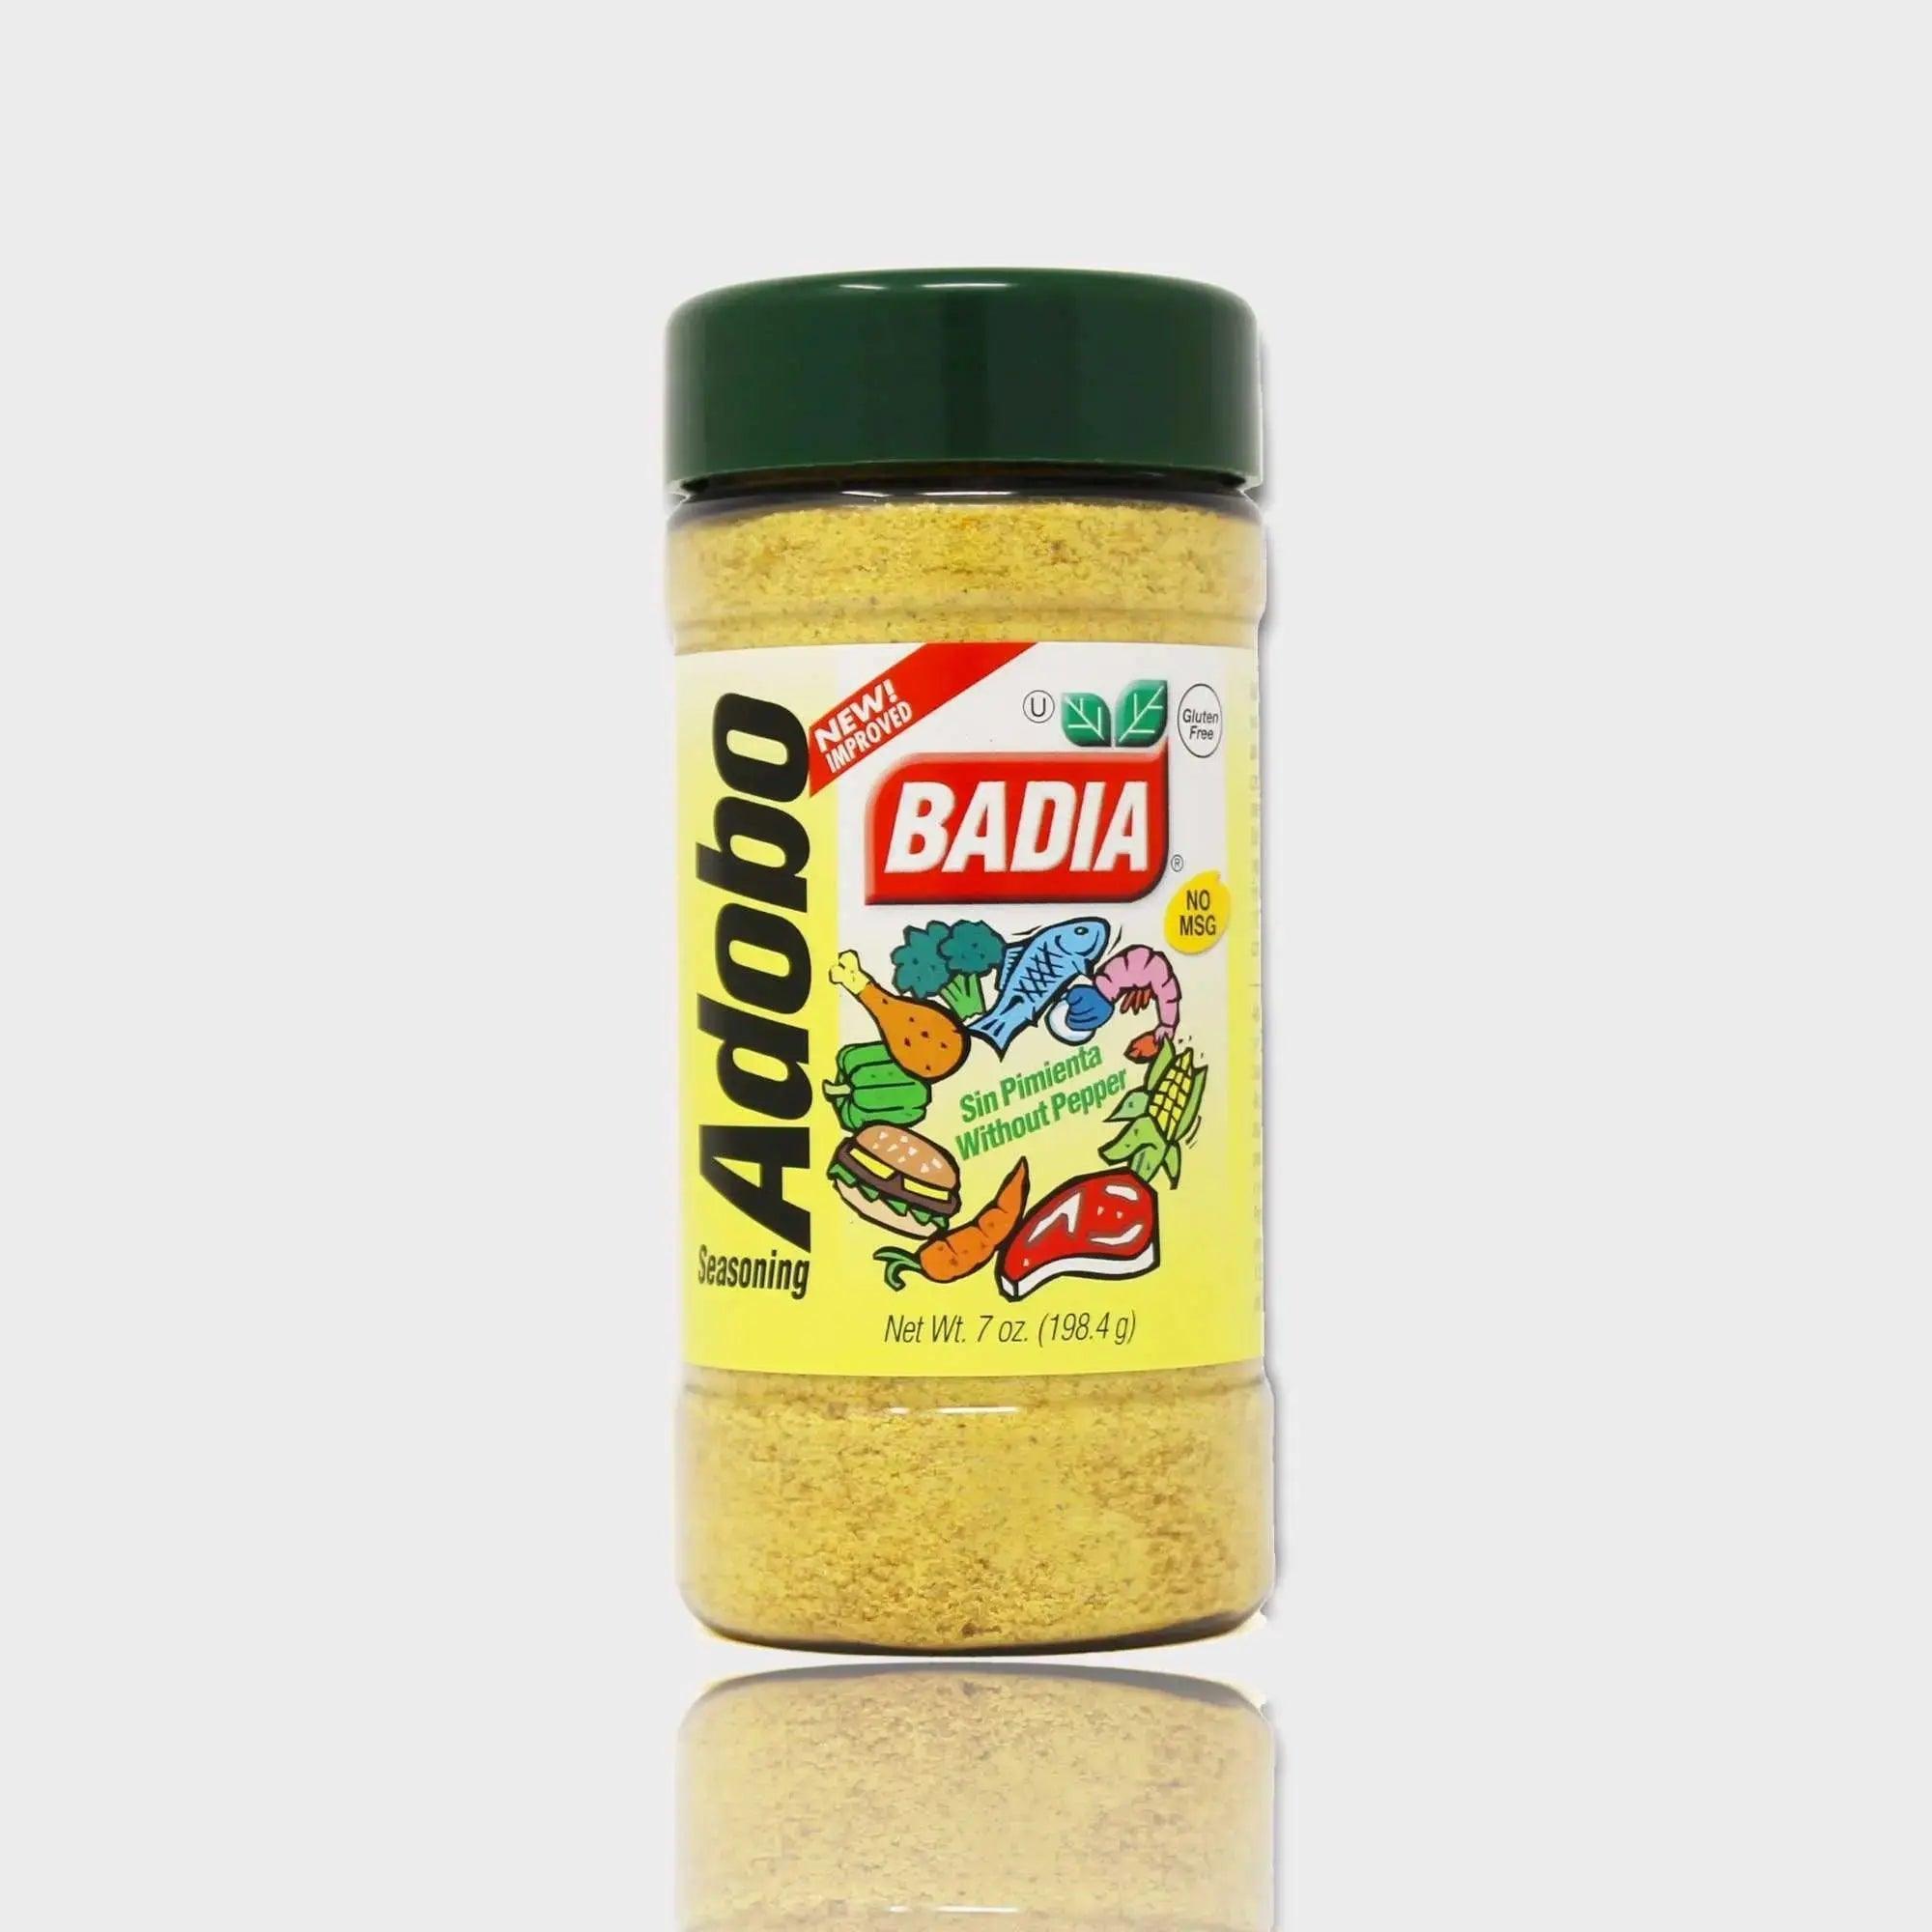 Badia Adobo Without Pepper for Meats, Poultry, Fish, Seafood and Vegetables - Honesty Sales U.K